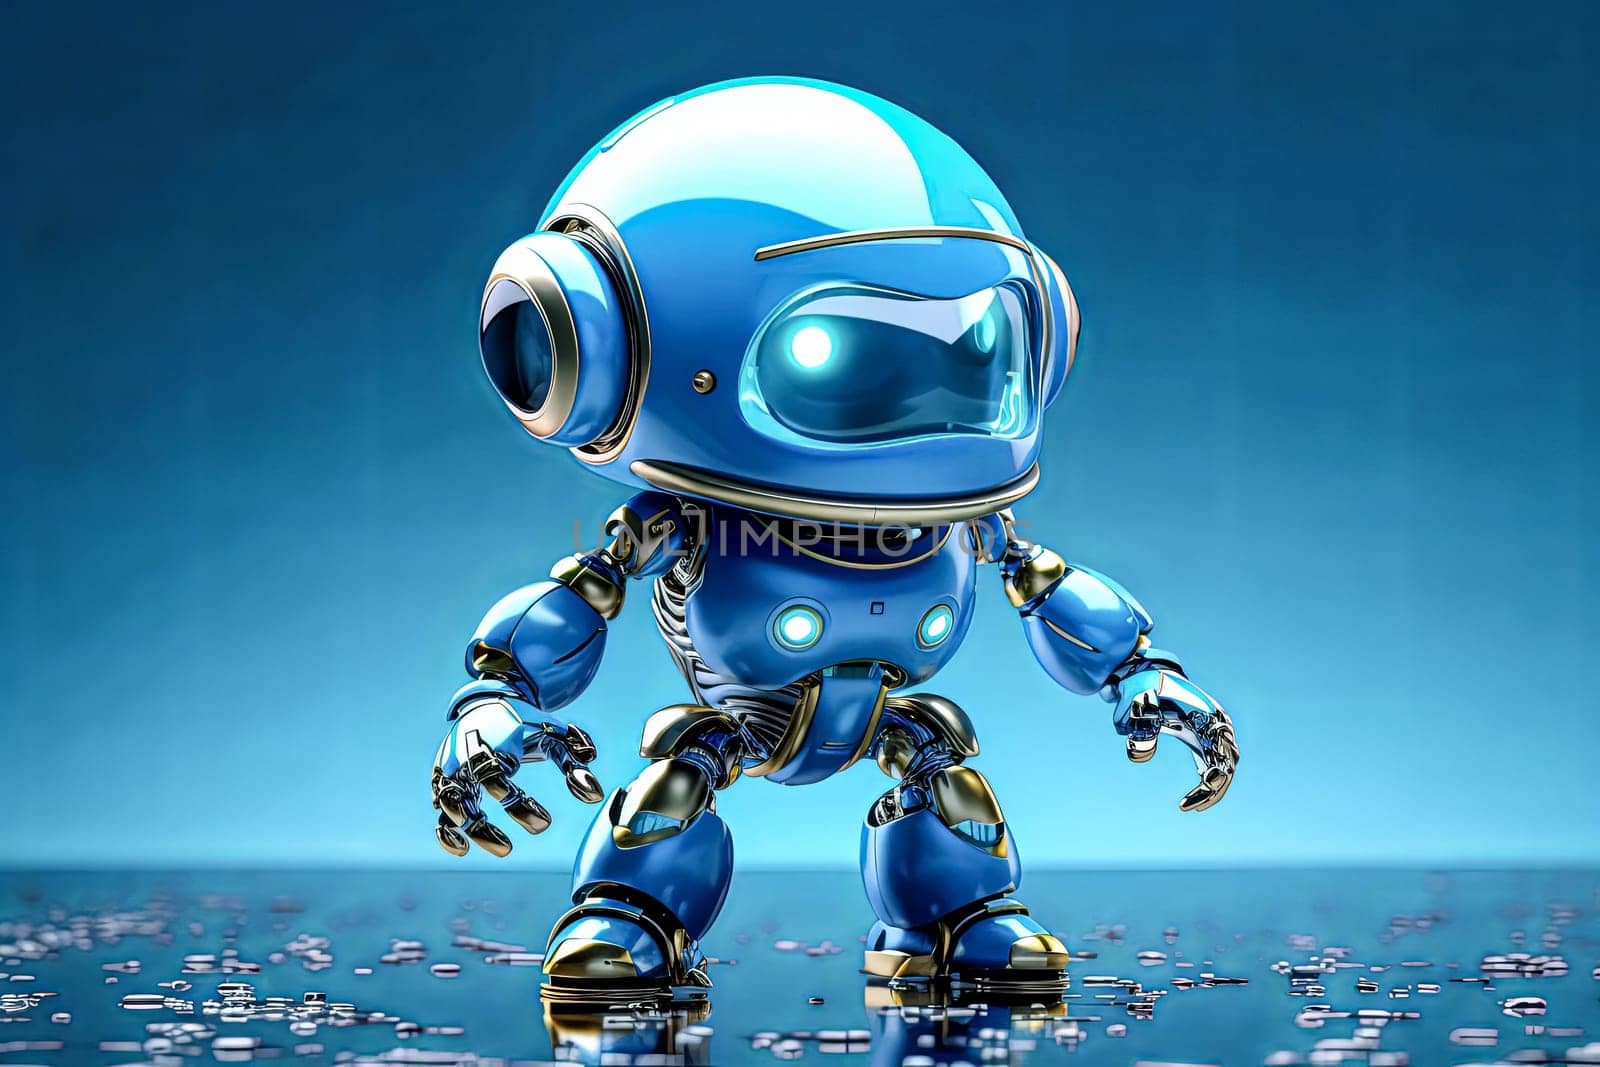 A robot is standing on a wet street. The robot is blue and yellow